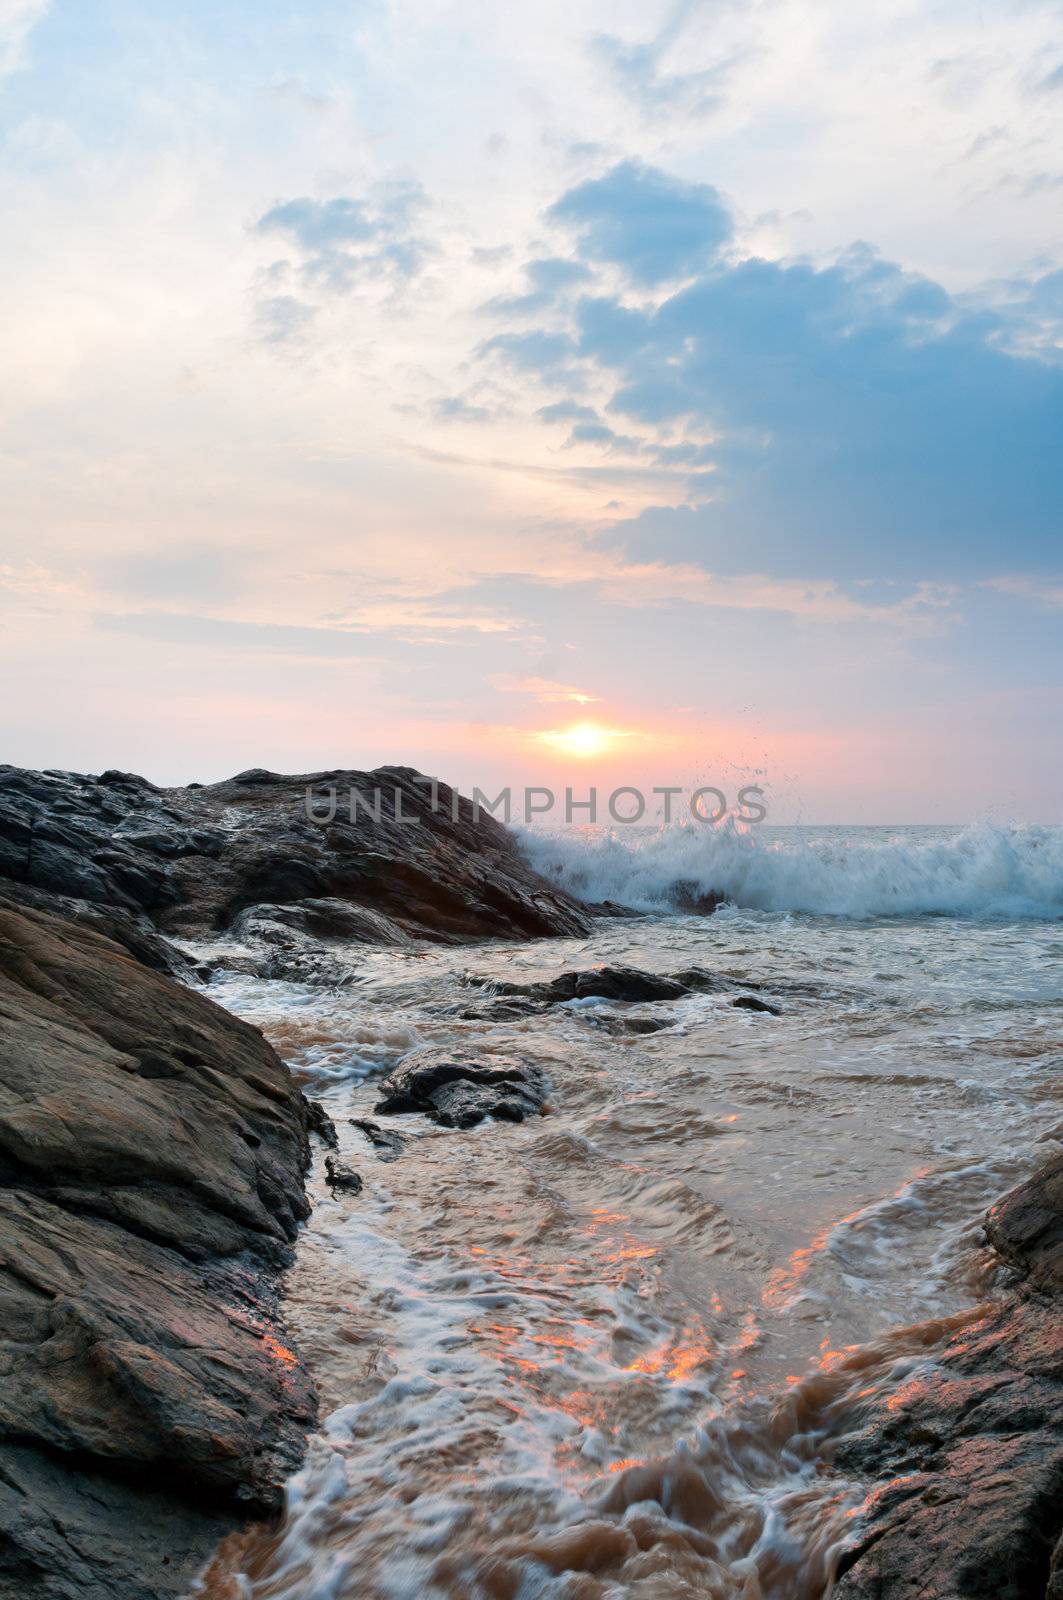 Beautiful stones and waves at sunset by iryna_rasko